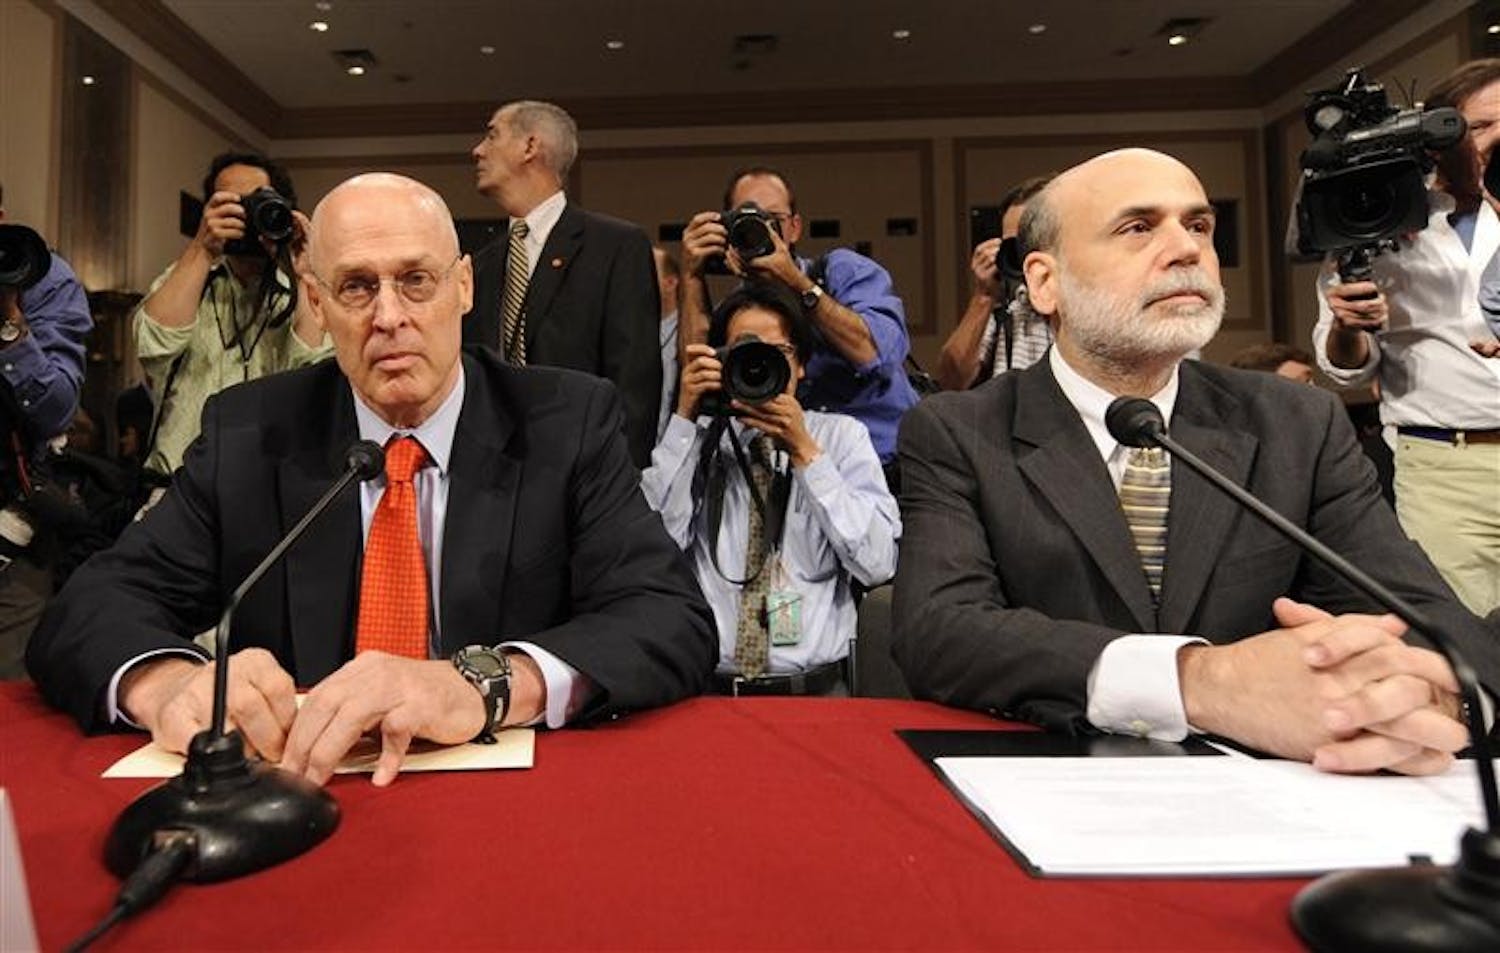 Federal Reserve Chairman Ben Bernanke, right, and Treasury Secretary Henry Paulson, sit at the witness table prior to testifying before the Senate Banking Committee on Tuesday at Capitol Hill in Washington.